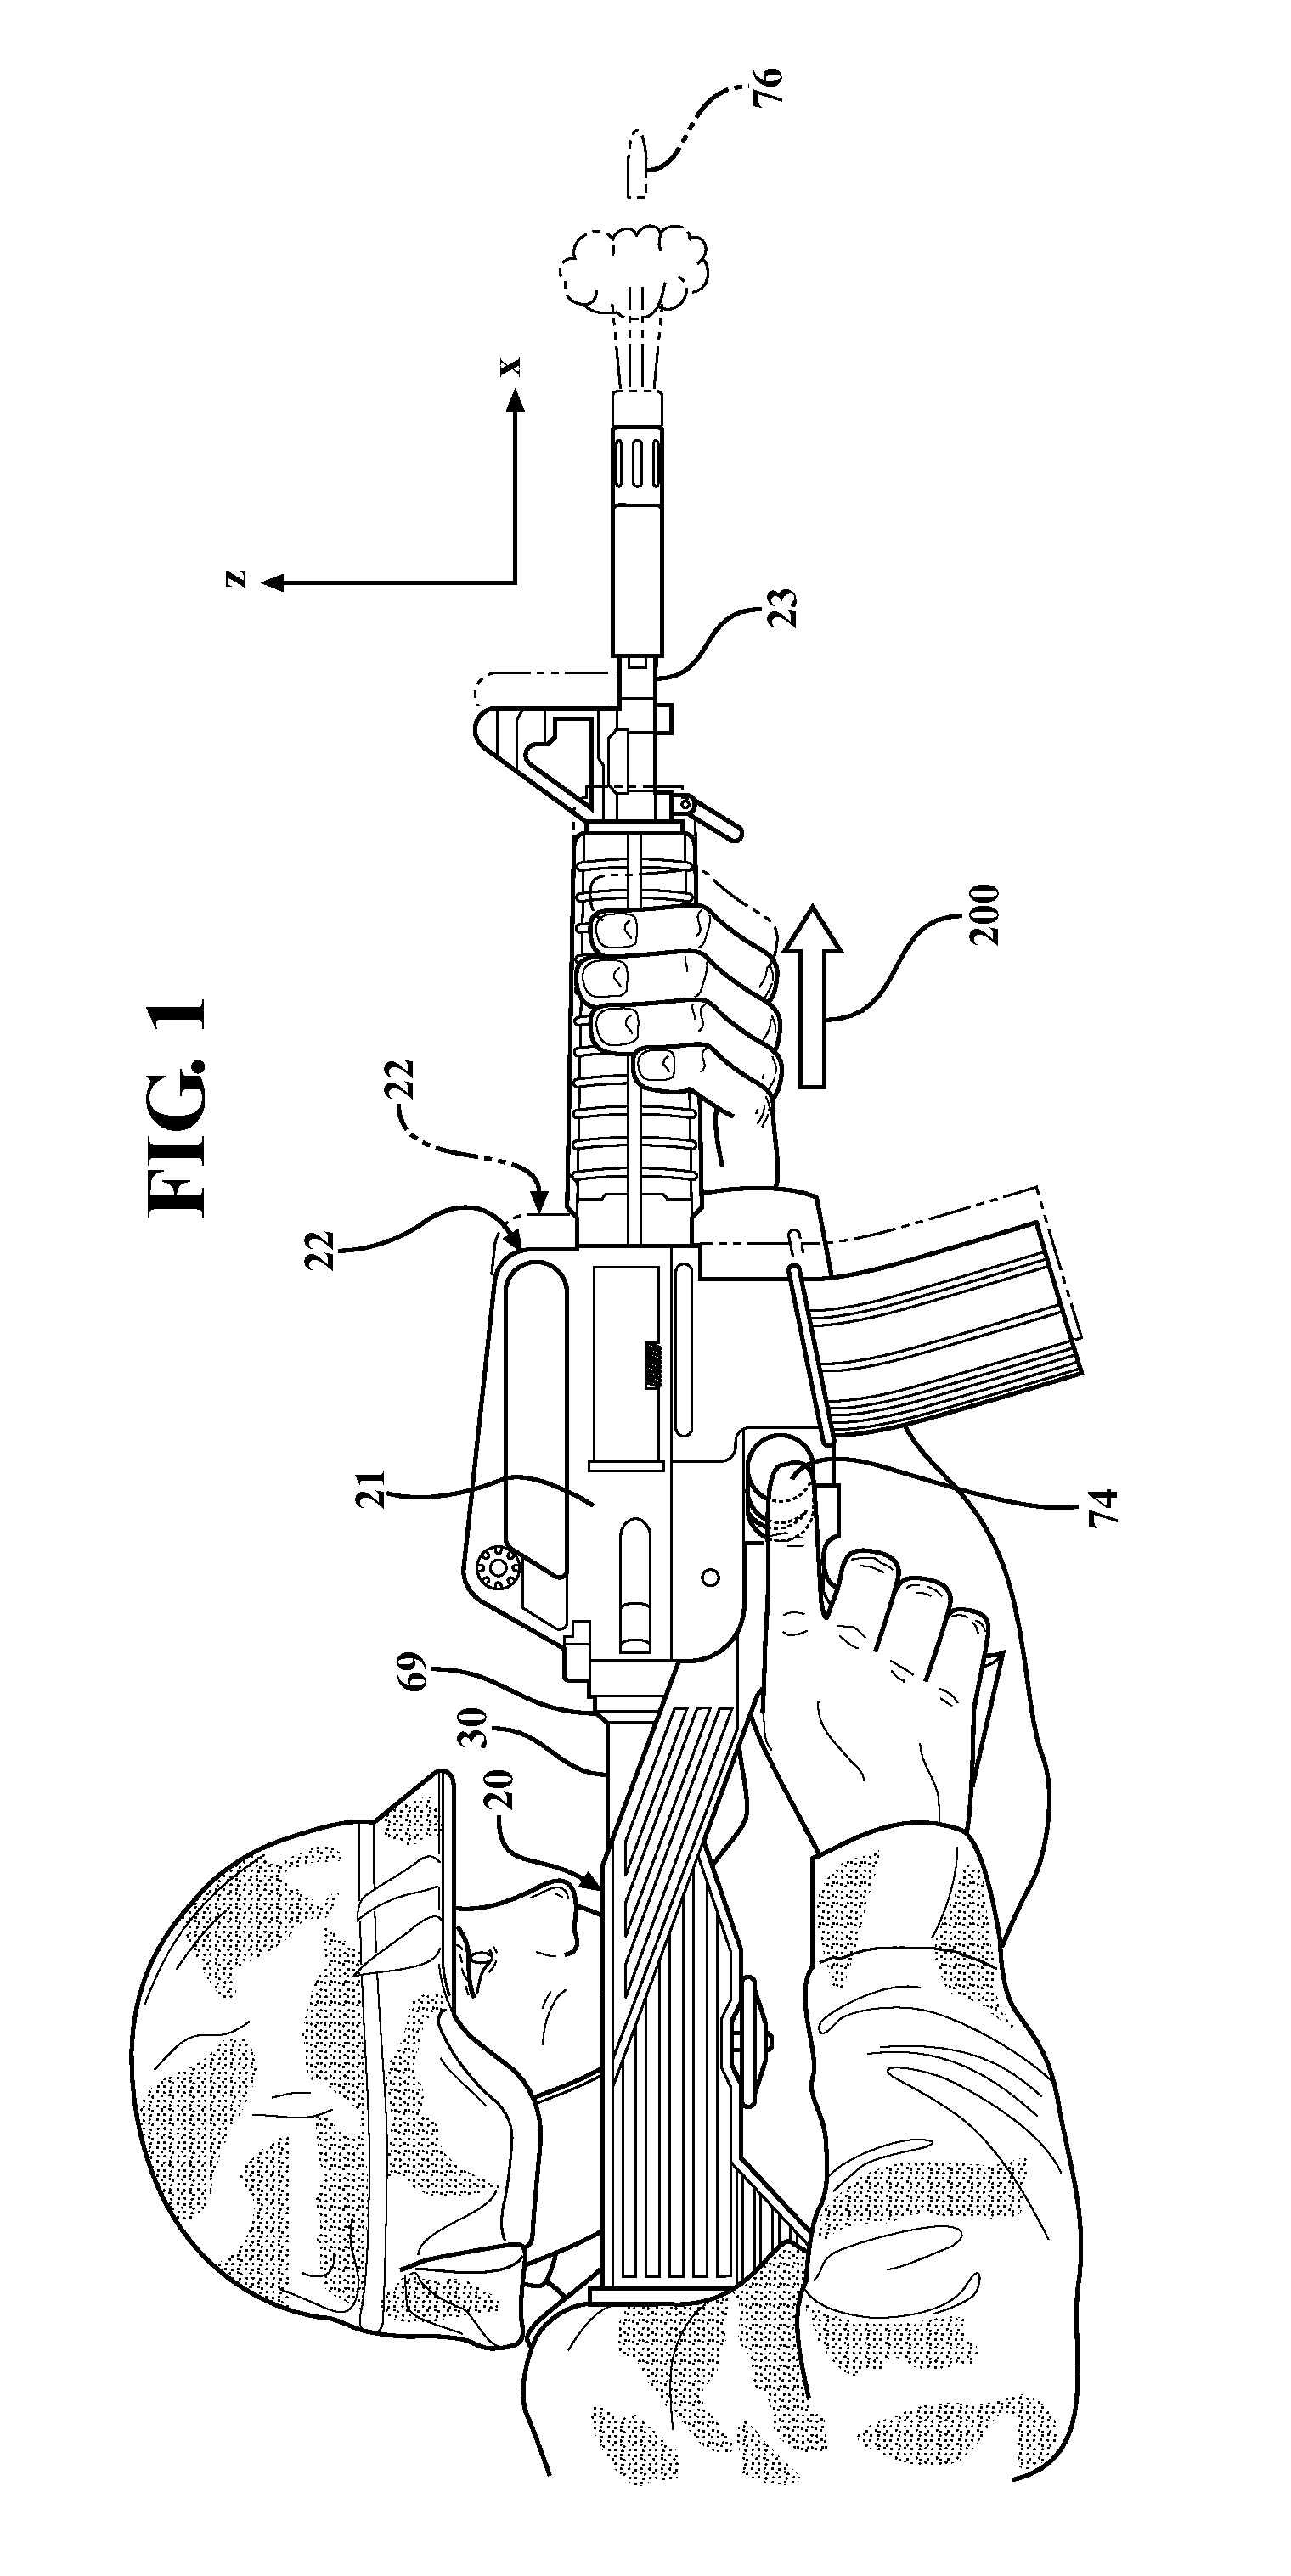 Interface system for firearm with sliding stock